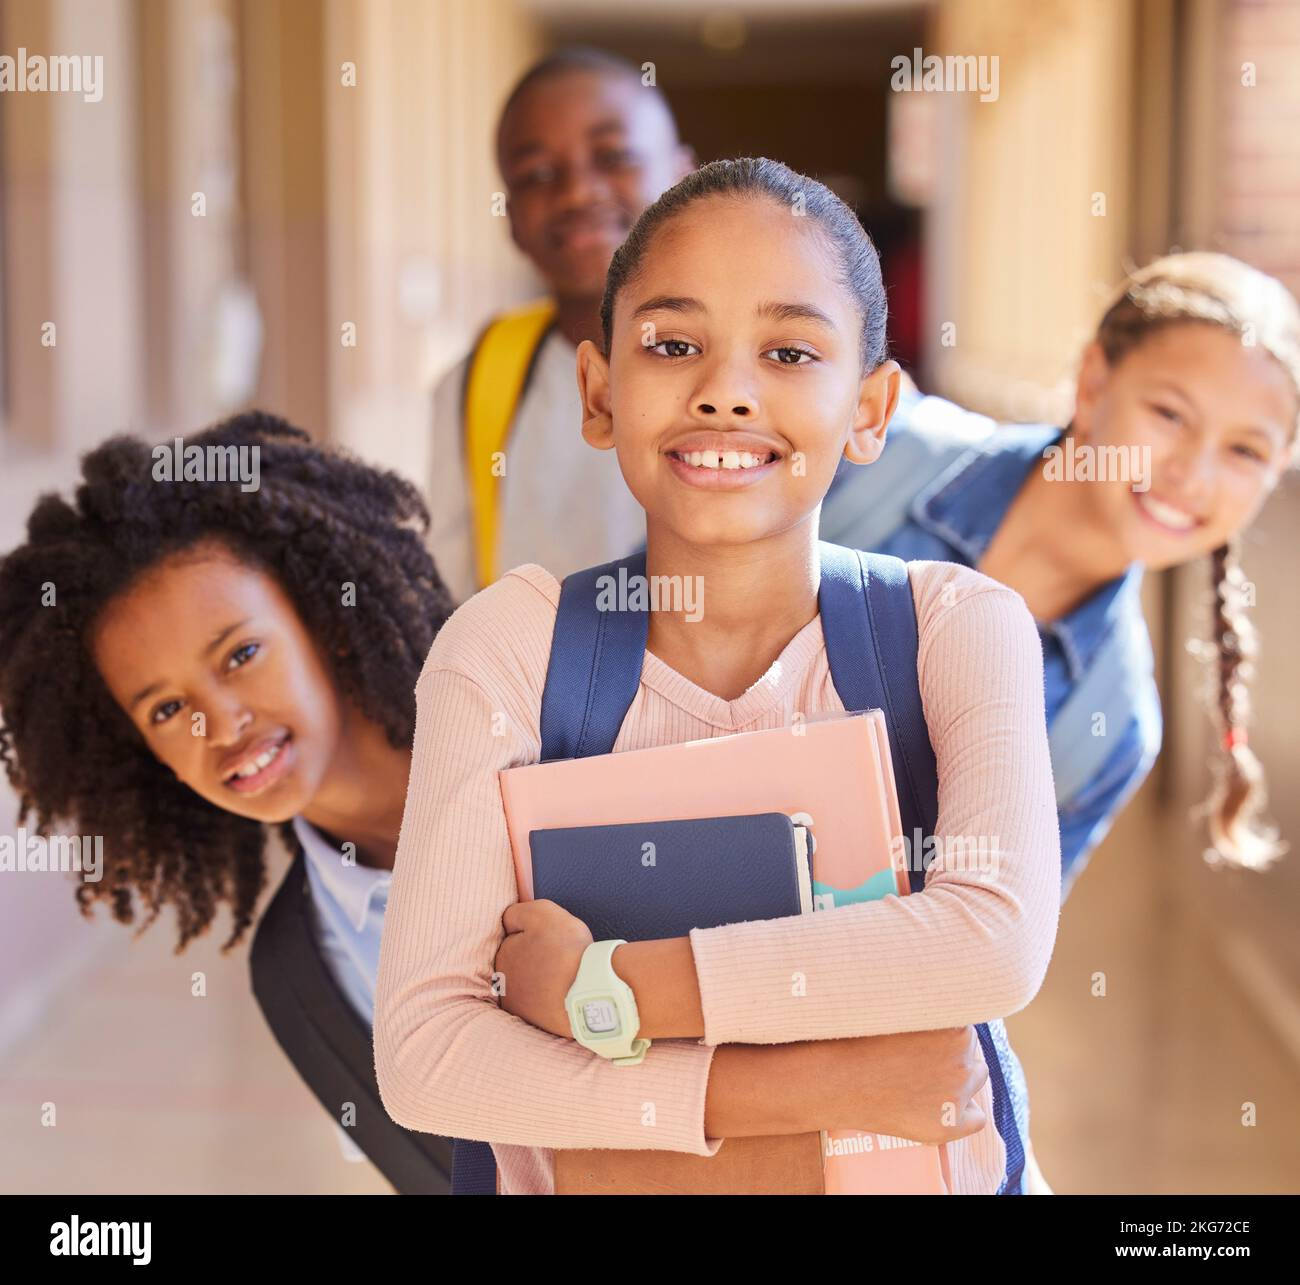 Education, children and portrait of friends at school together standing in the hallway for class. Diversity, backpack and happy students with a smile Stock Photo